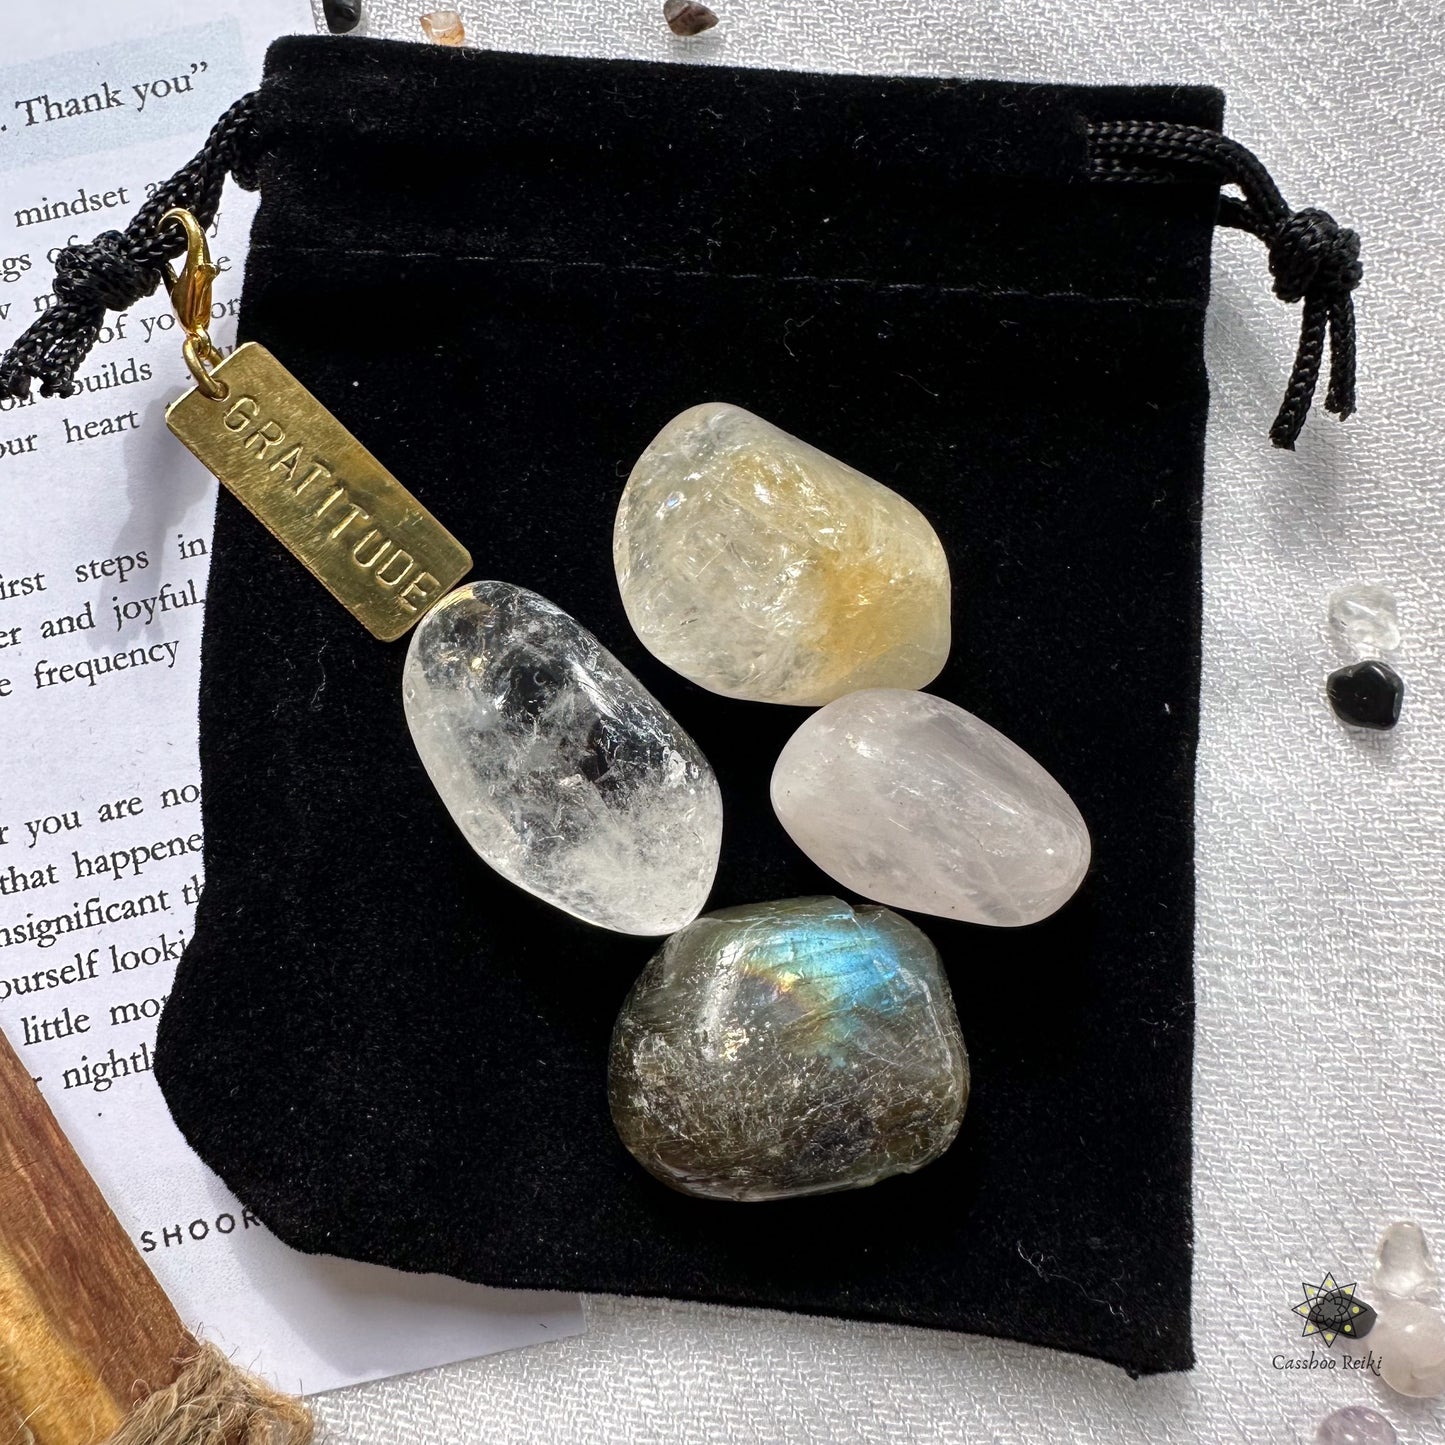 Crystal Set for Gratitude and Harmony with Dish and Smudge Bundle | Crystals for Thanksgiving | Holiday Crystal Gift